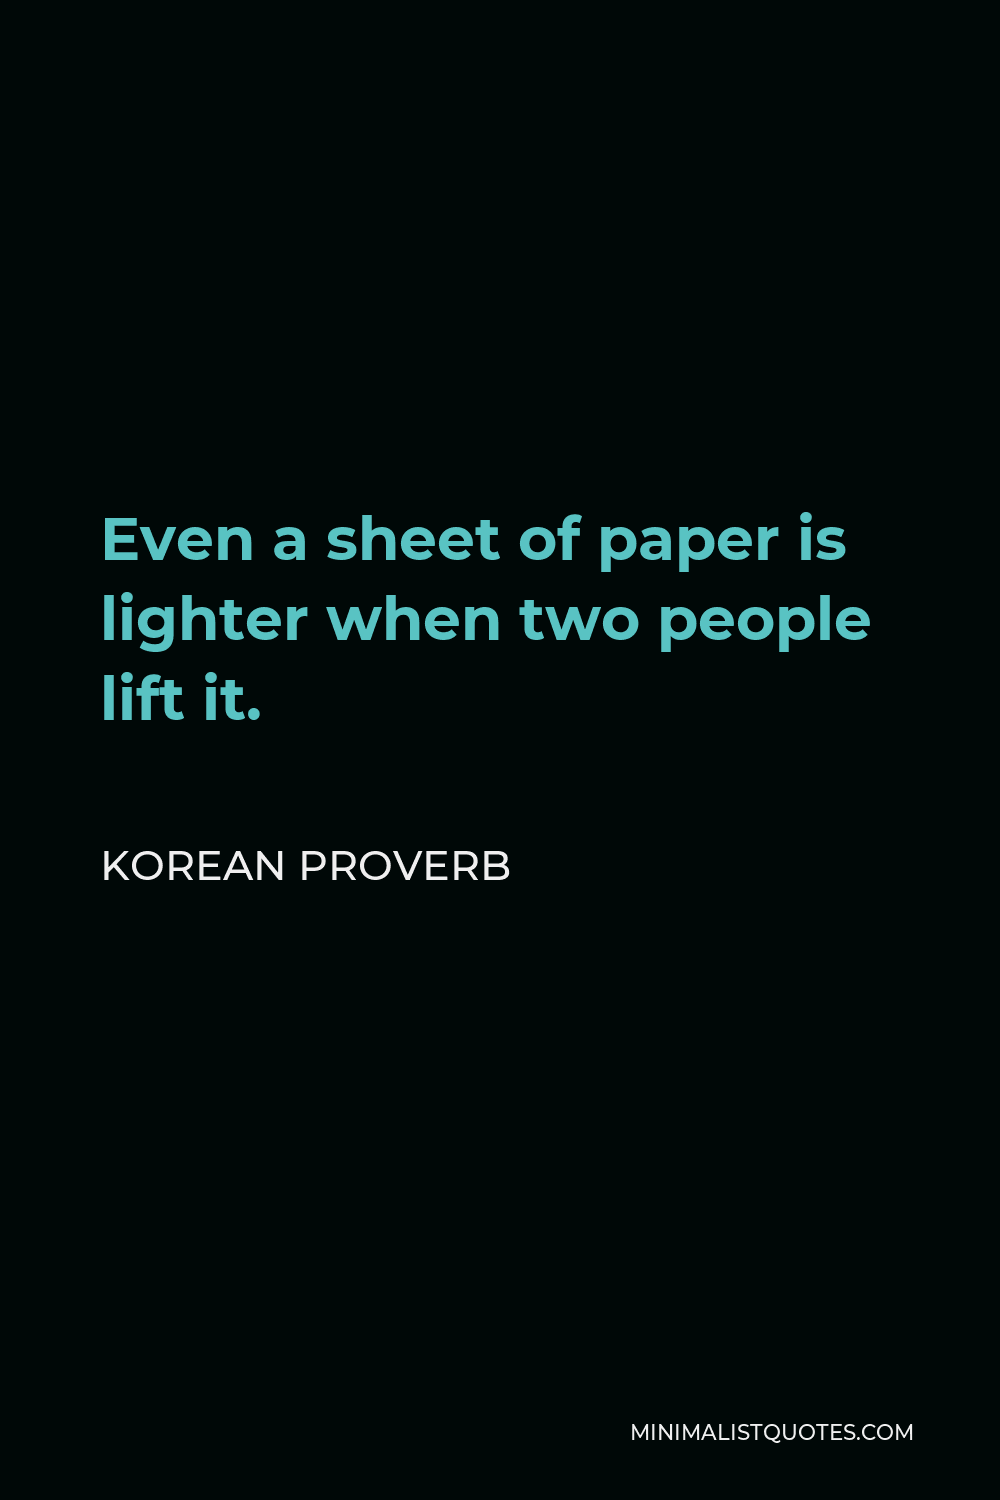 Korean Proverb Quote - Even a sheet of paper is lighter when two people lift it.